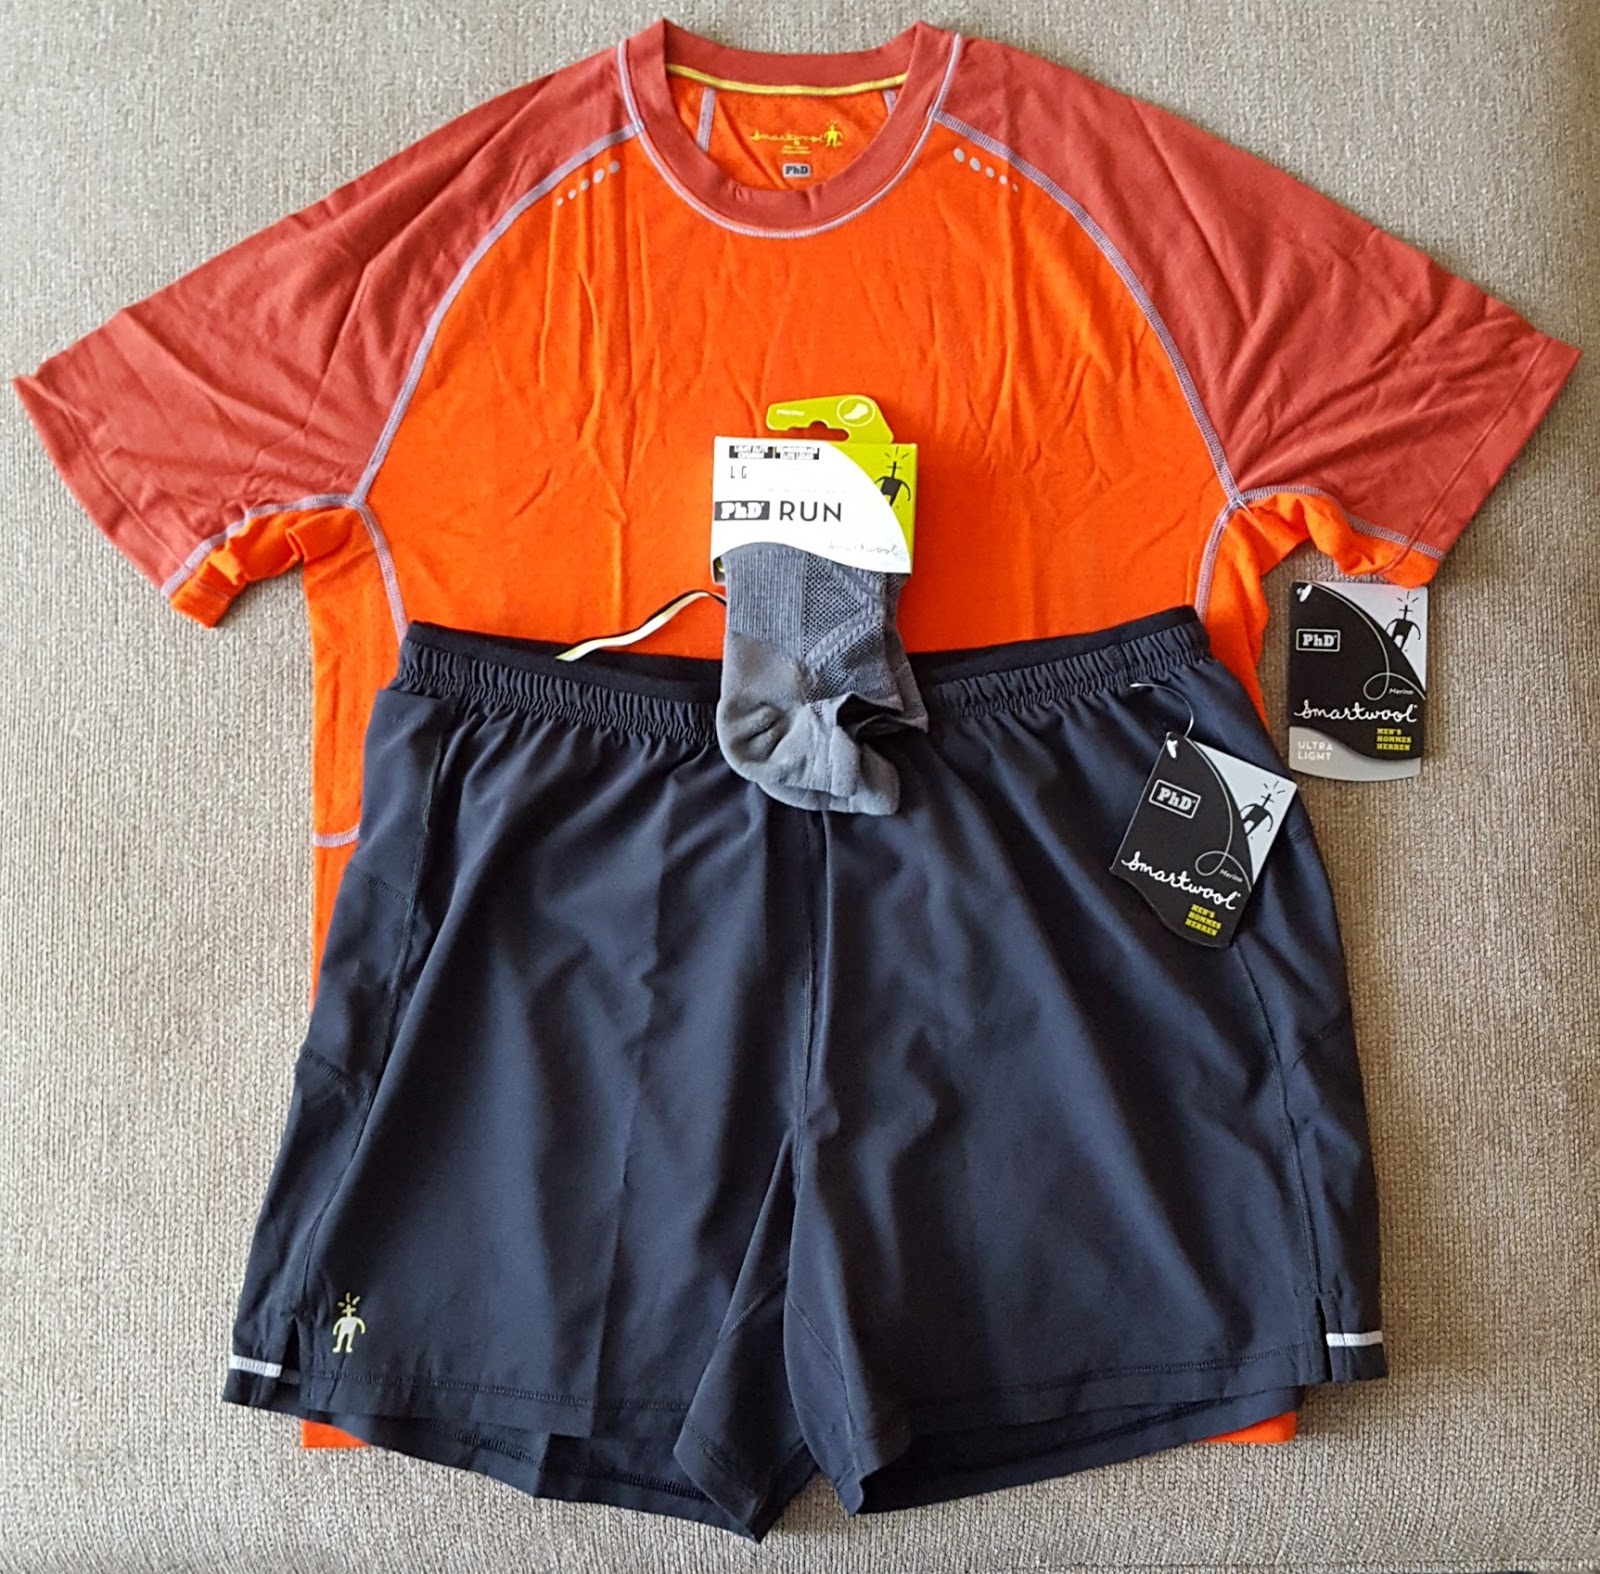 Running Without Injuries: SmartWool PhD Running Gear Review